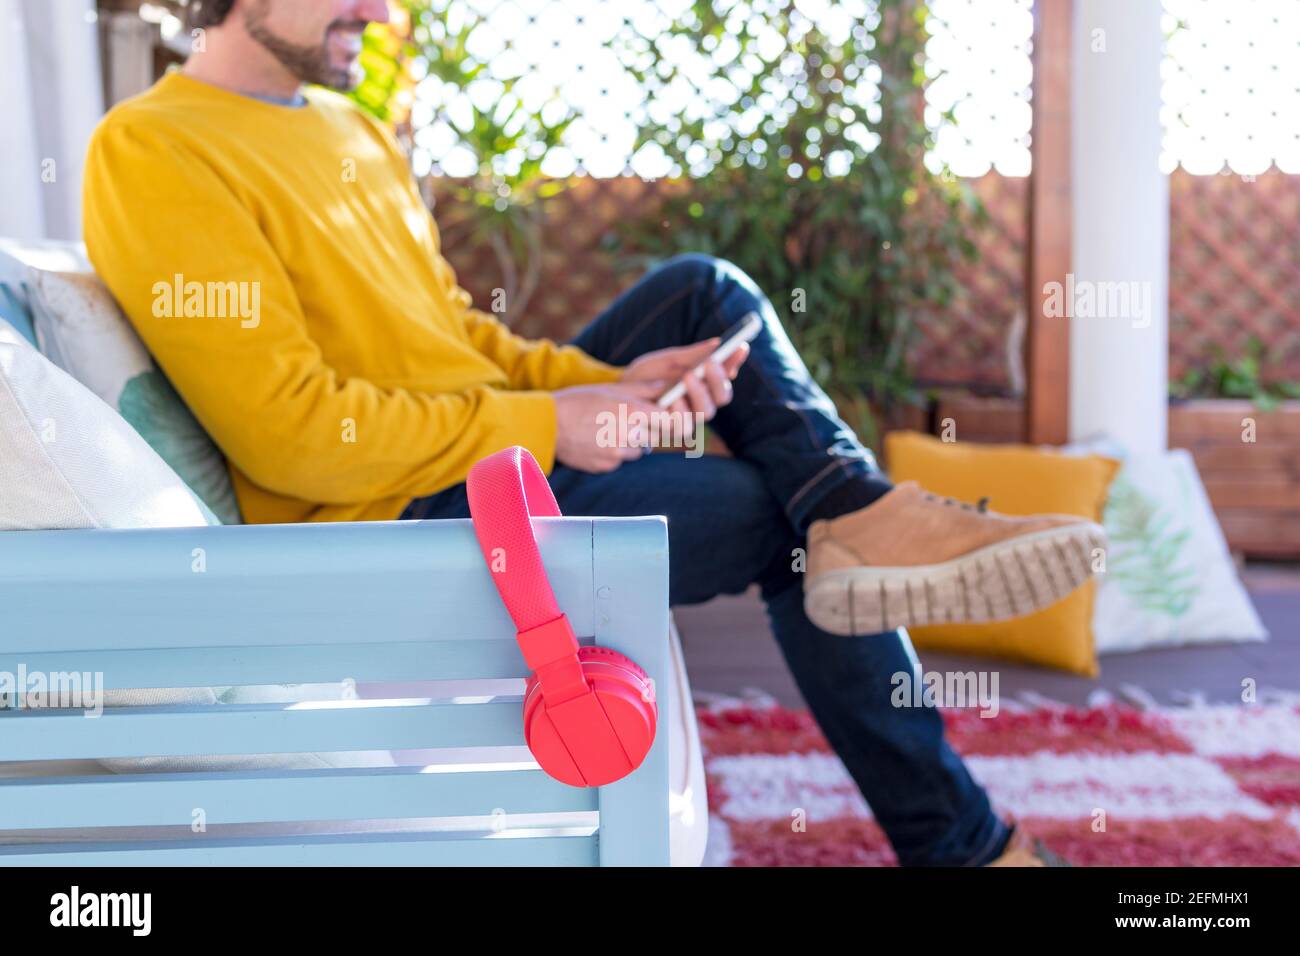 Unfocus and unrecognizable man chatting on his smartphone. Red headphones on foreground. Focus on red headphones. Selected focus. Stock Photo